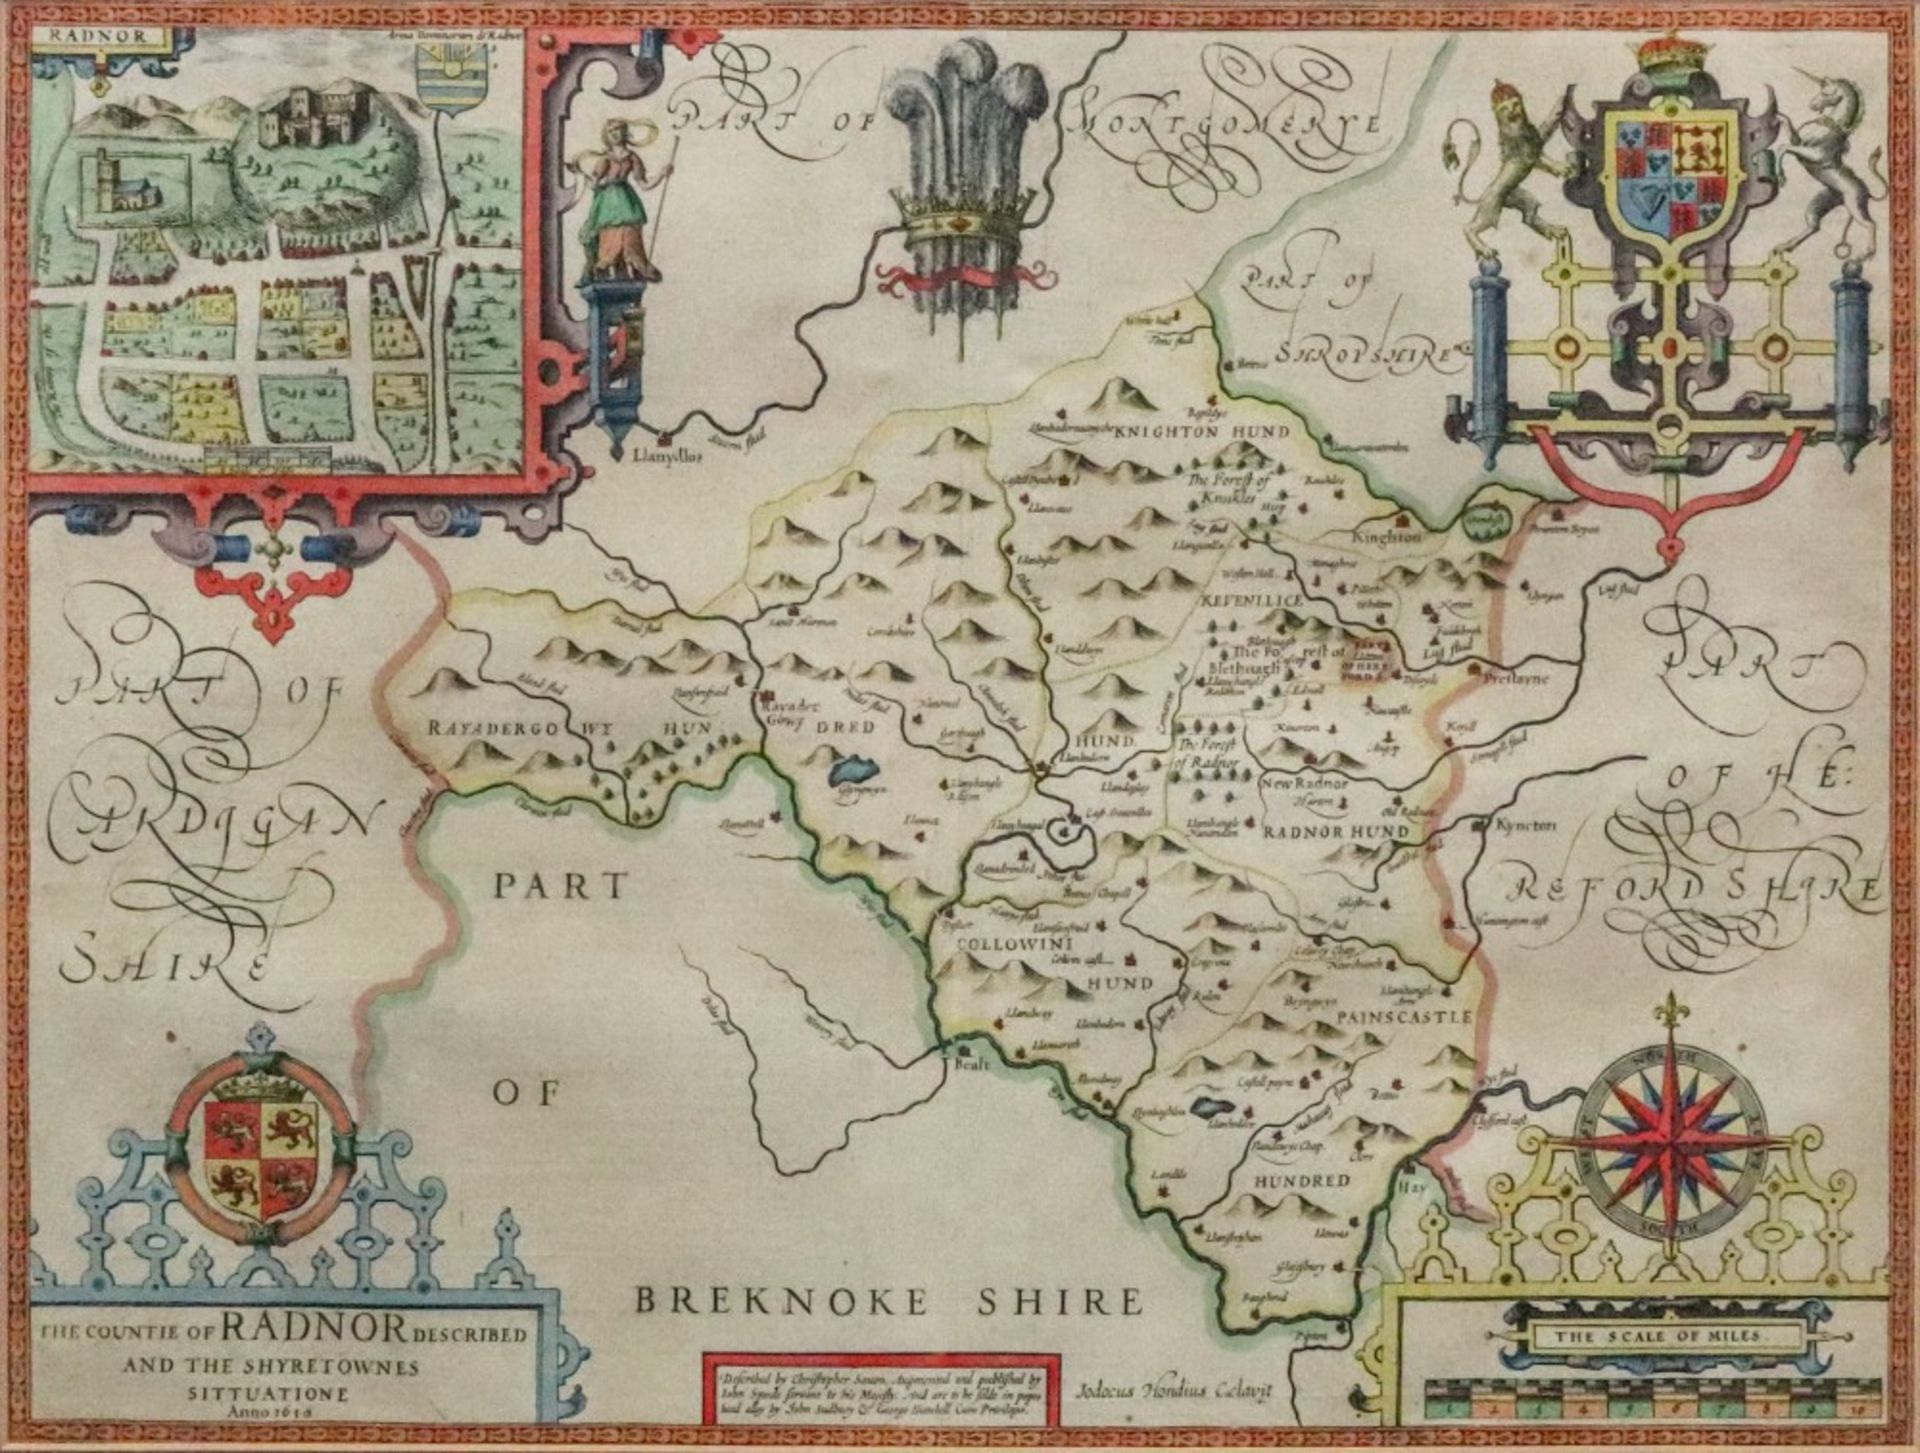 John Speede, The Countie of Radnor described and the Shyretownes Sittuatione (Sic), Anno 1610,